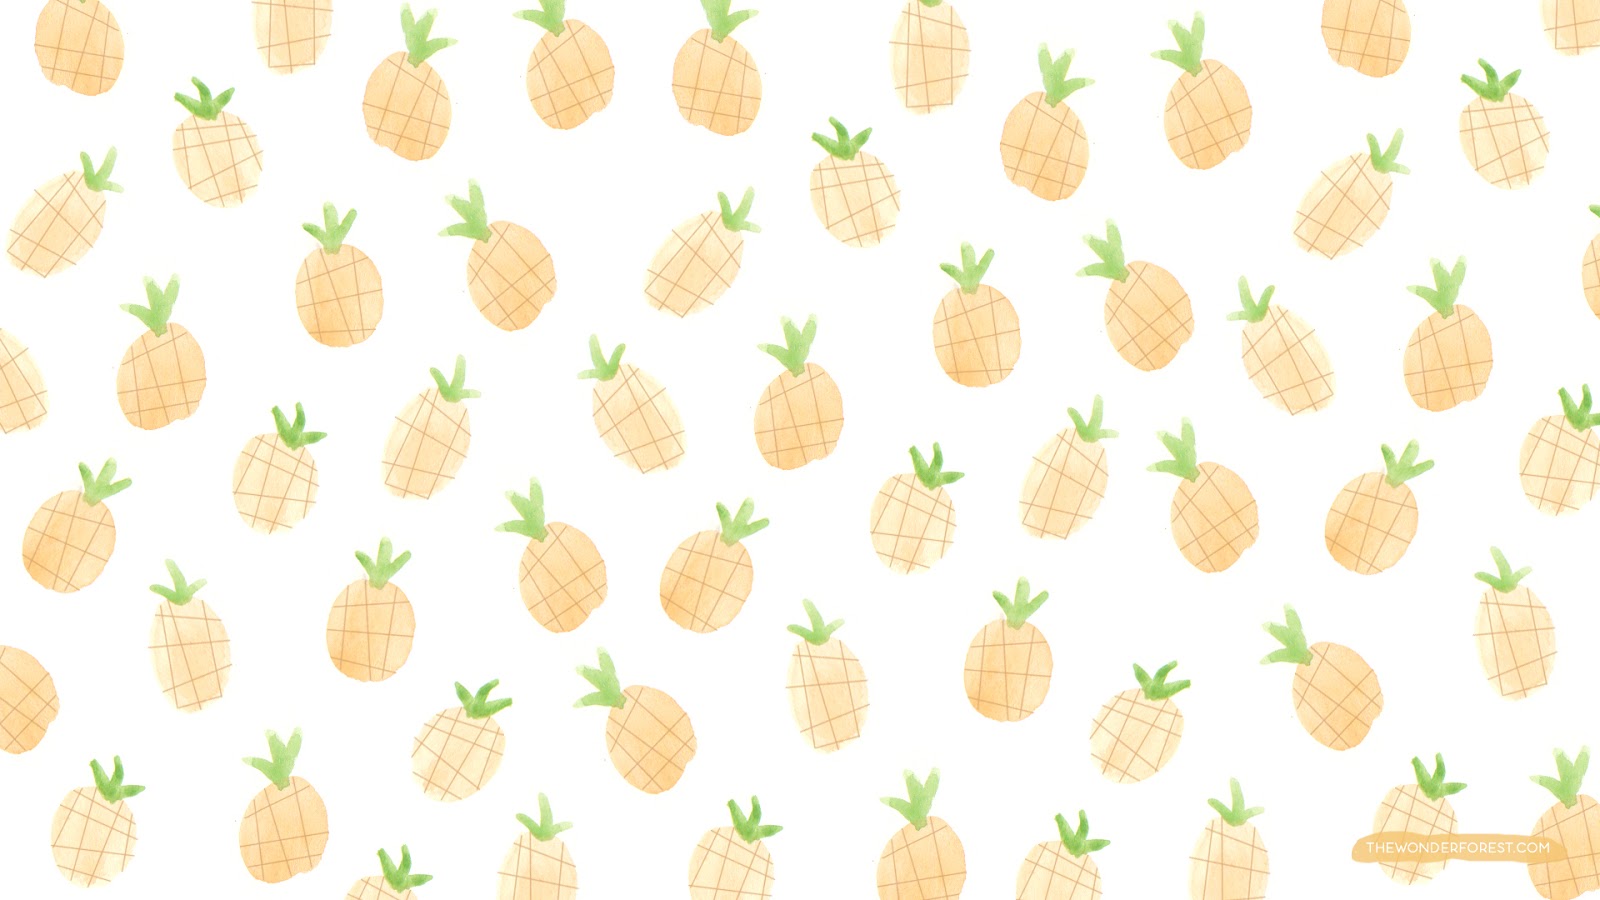 Fruity iPhone and Desktop Wallpapers   Wonder Forest